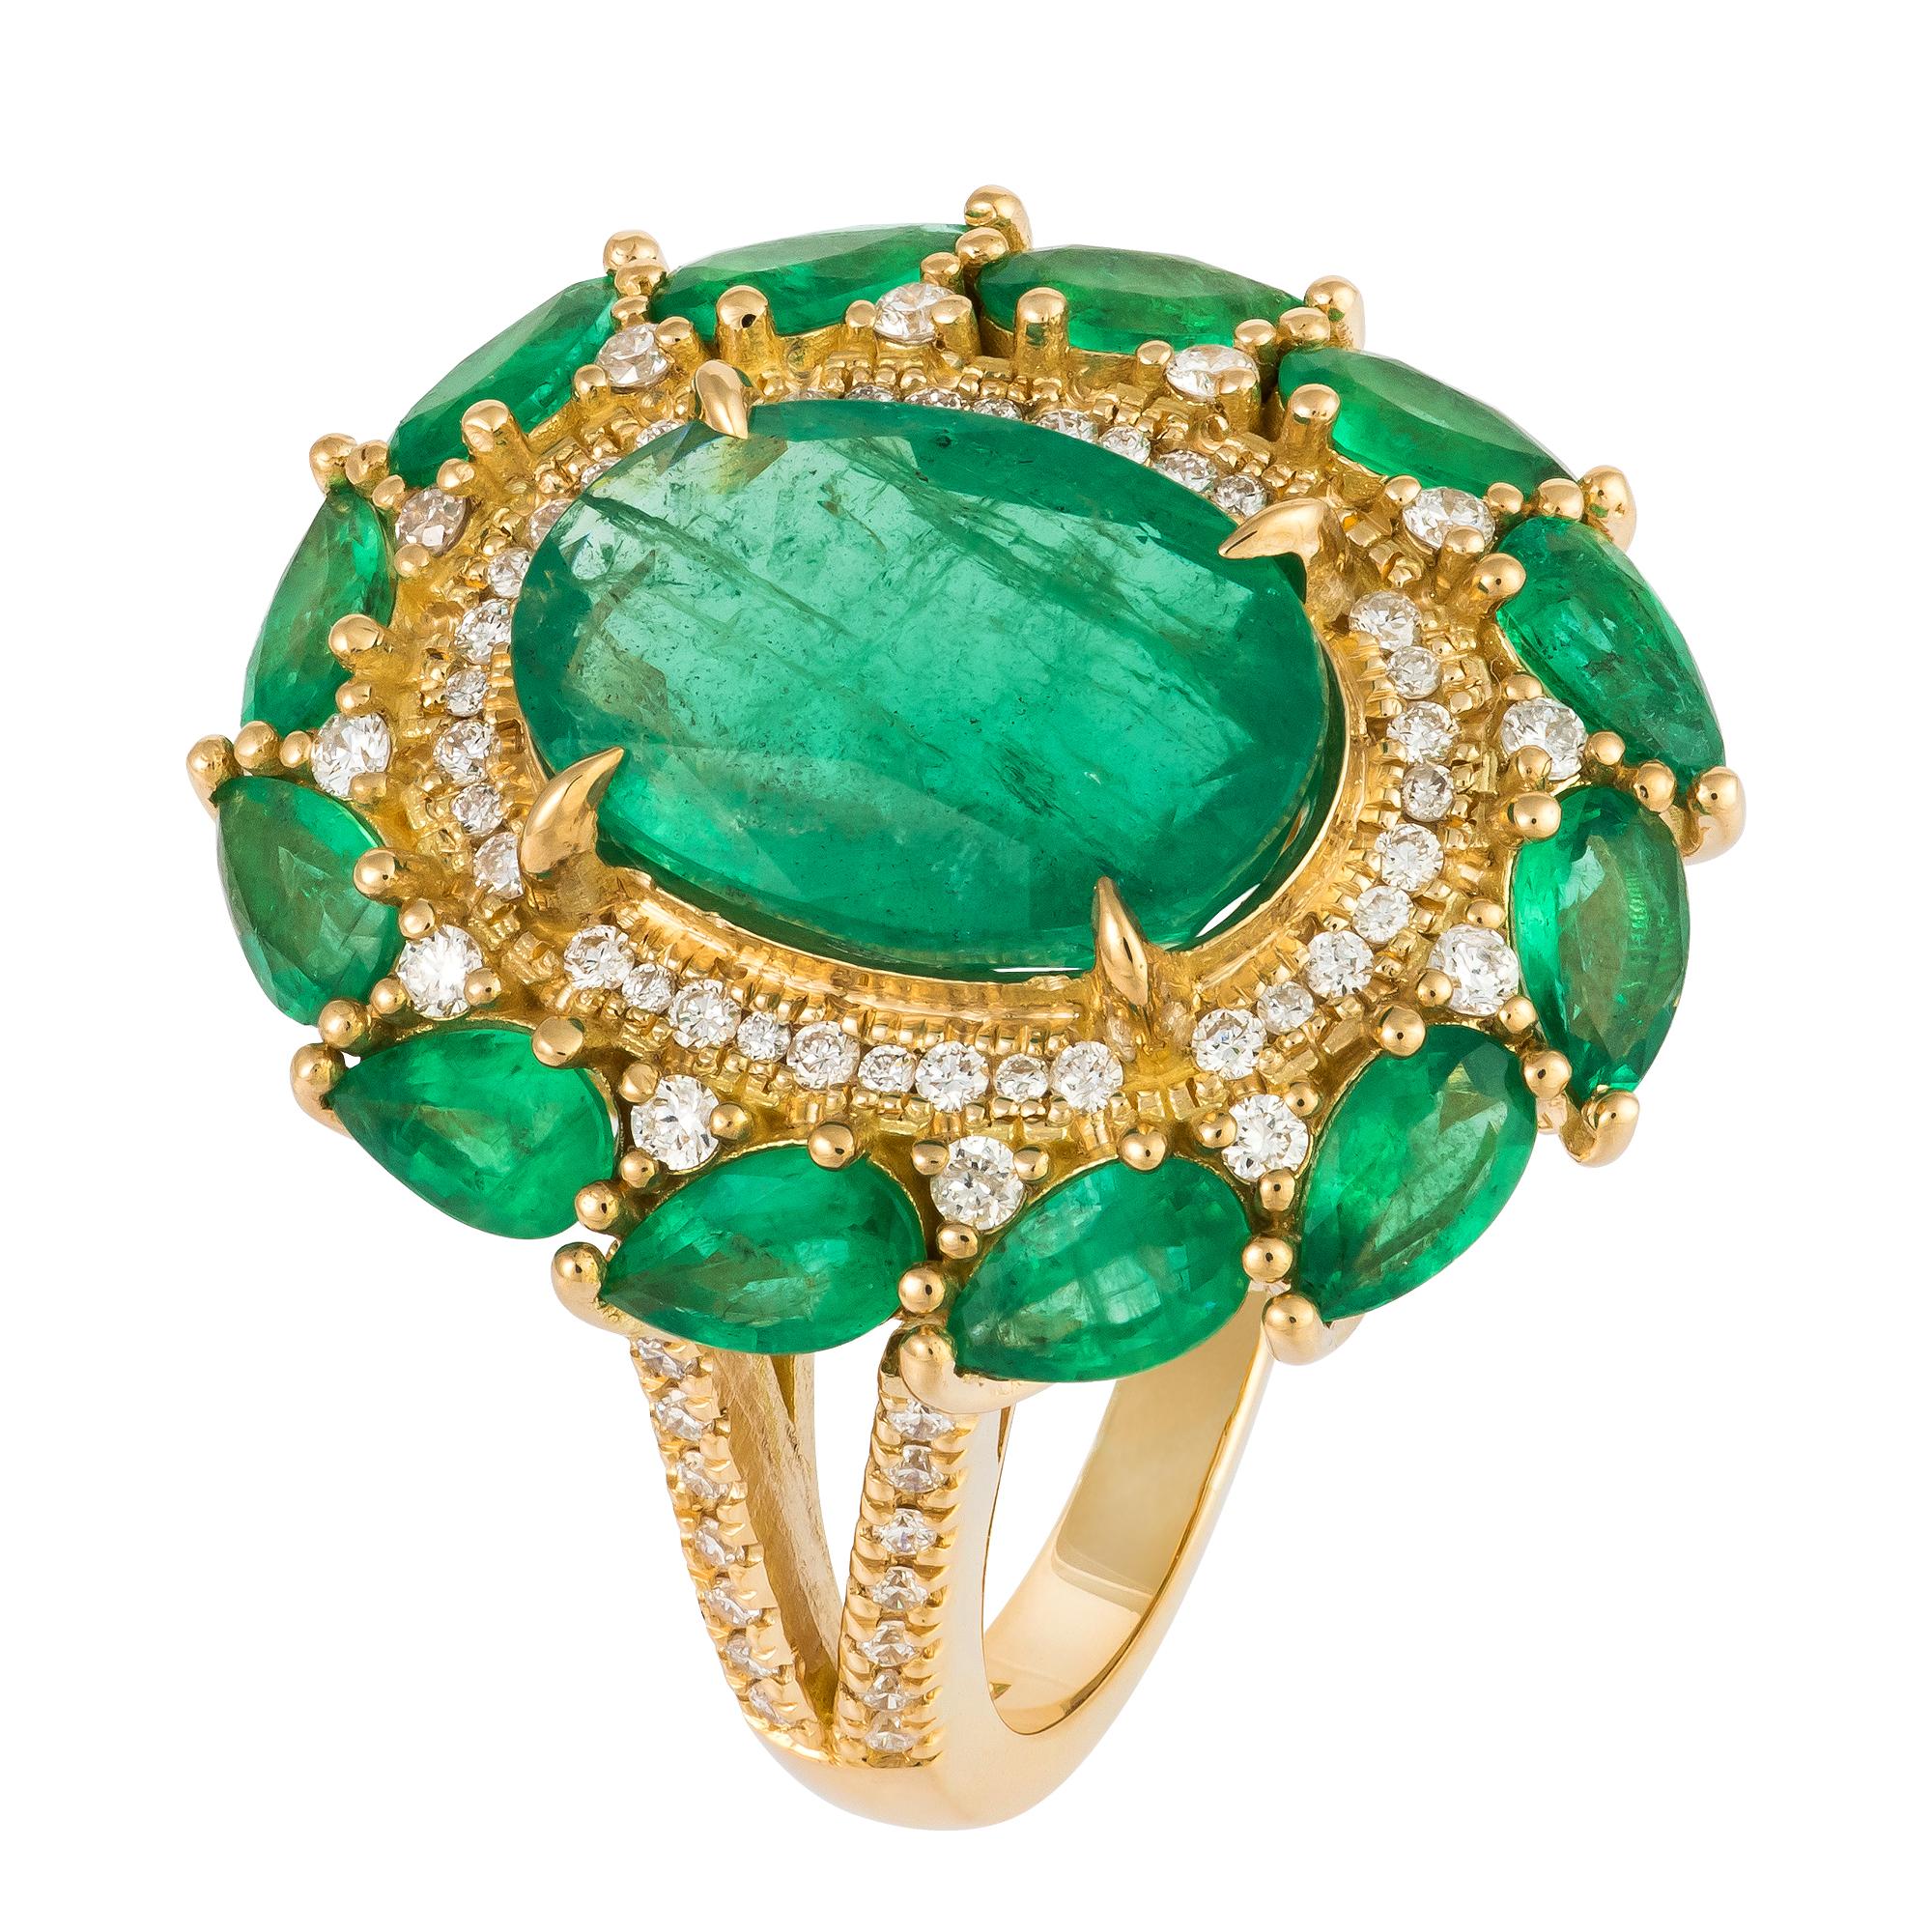 For Sale:  Impressive Yellow 18K Gold Emerald White Diamond Ring For Her 3